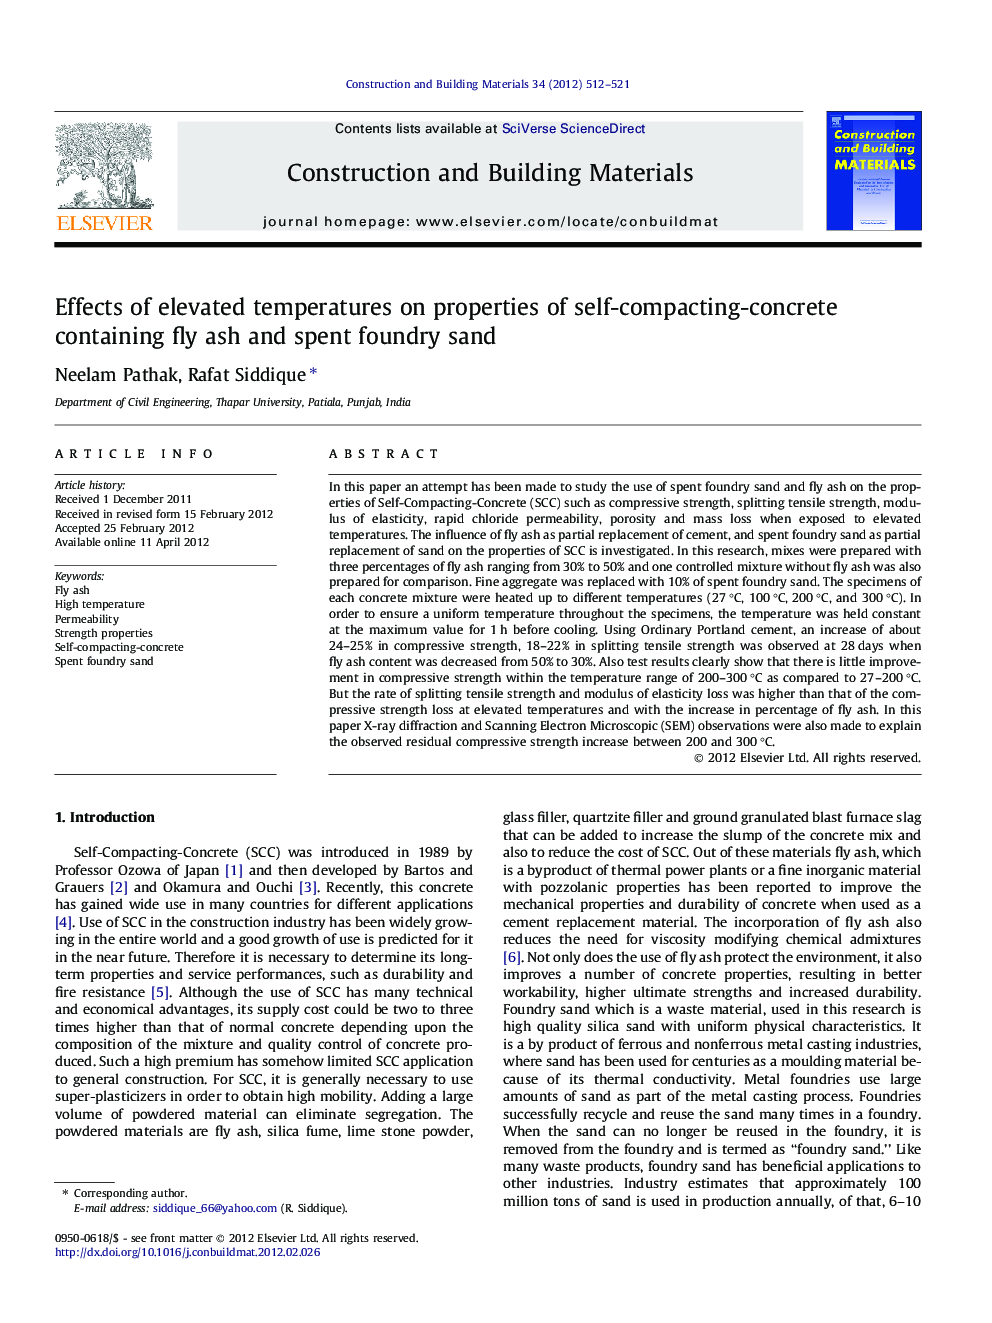 Effects of elevated temperatures on properties of self-compacting-concrete containing fly ash and spent foundry sand